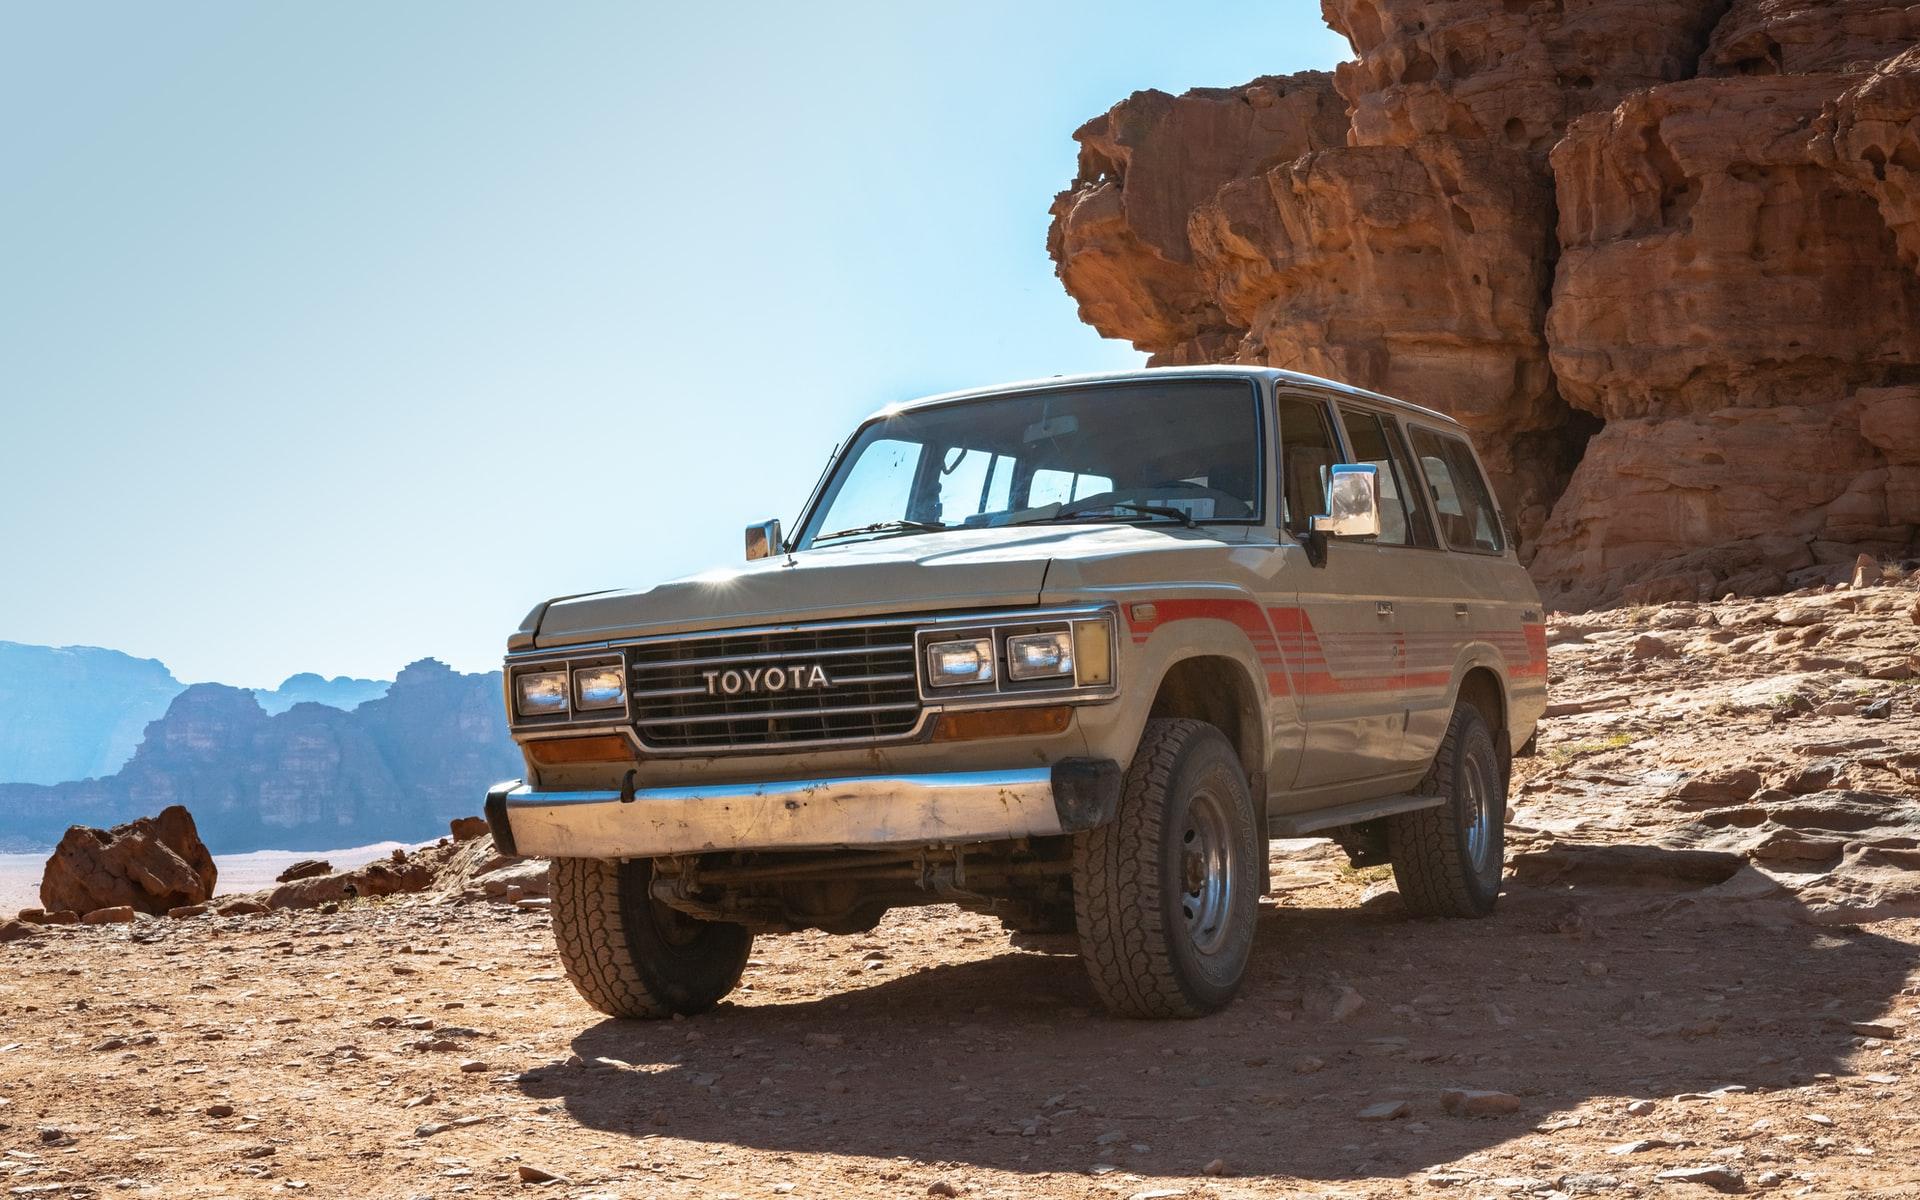 You can still snag an FJ60 for less than an FJ40 even though prices are on the rise.